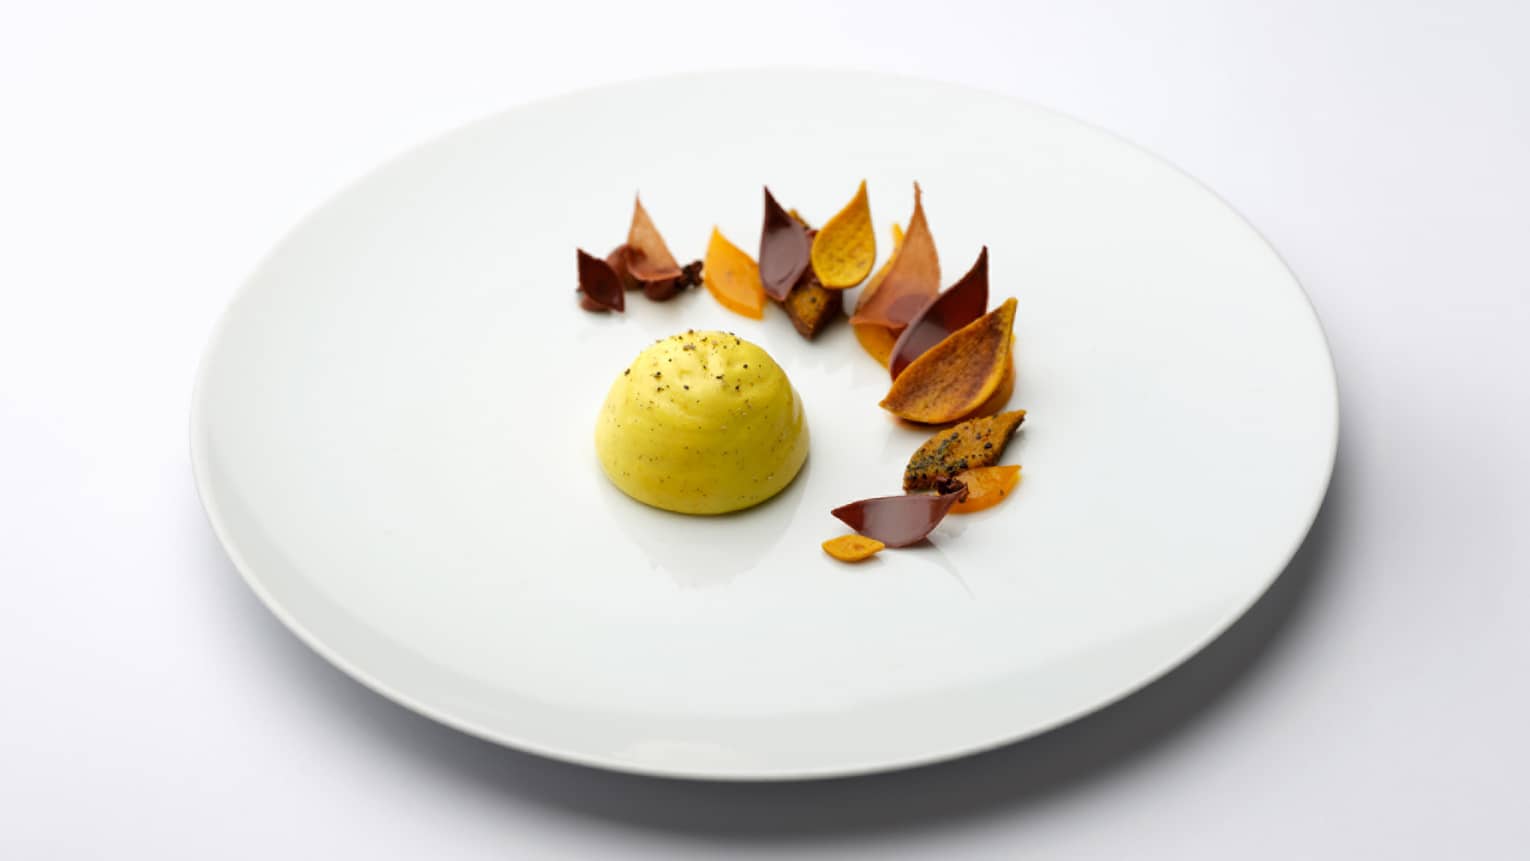  Confit Passion Fruit Dome with Ginger and Cocoa Nibs and Curry Madras on white plate